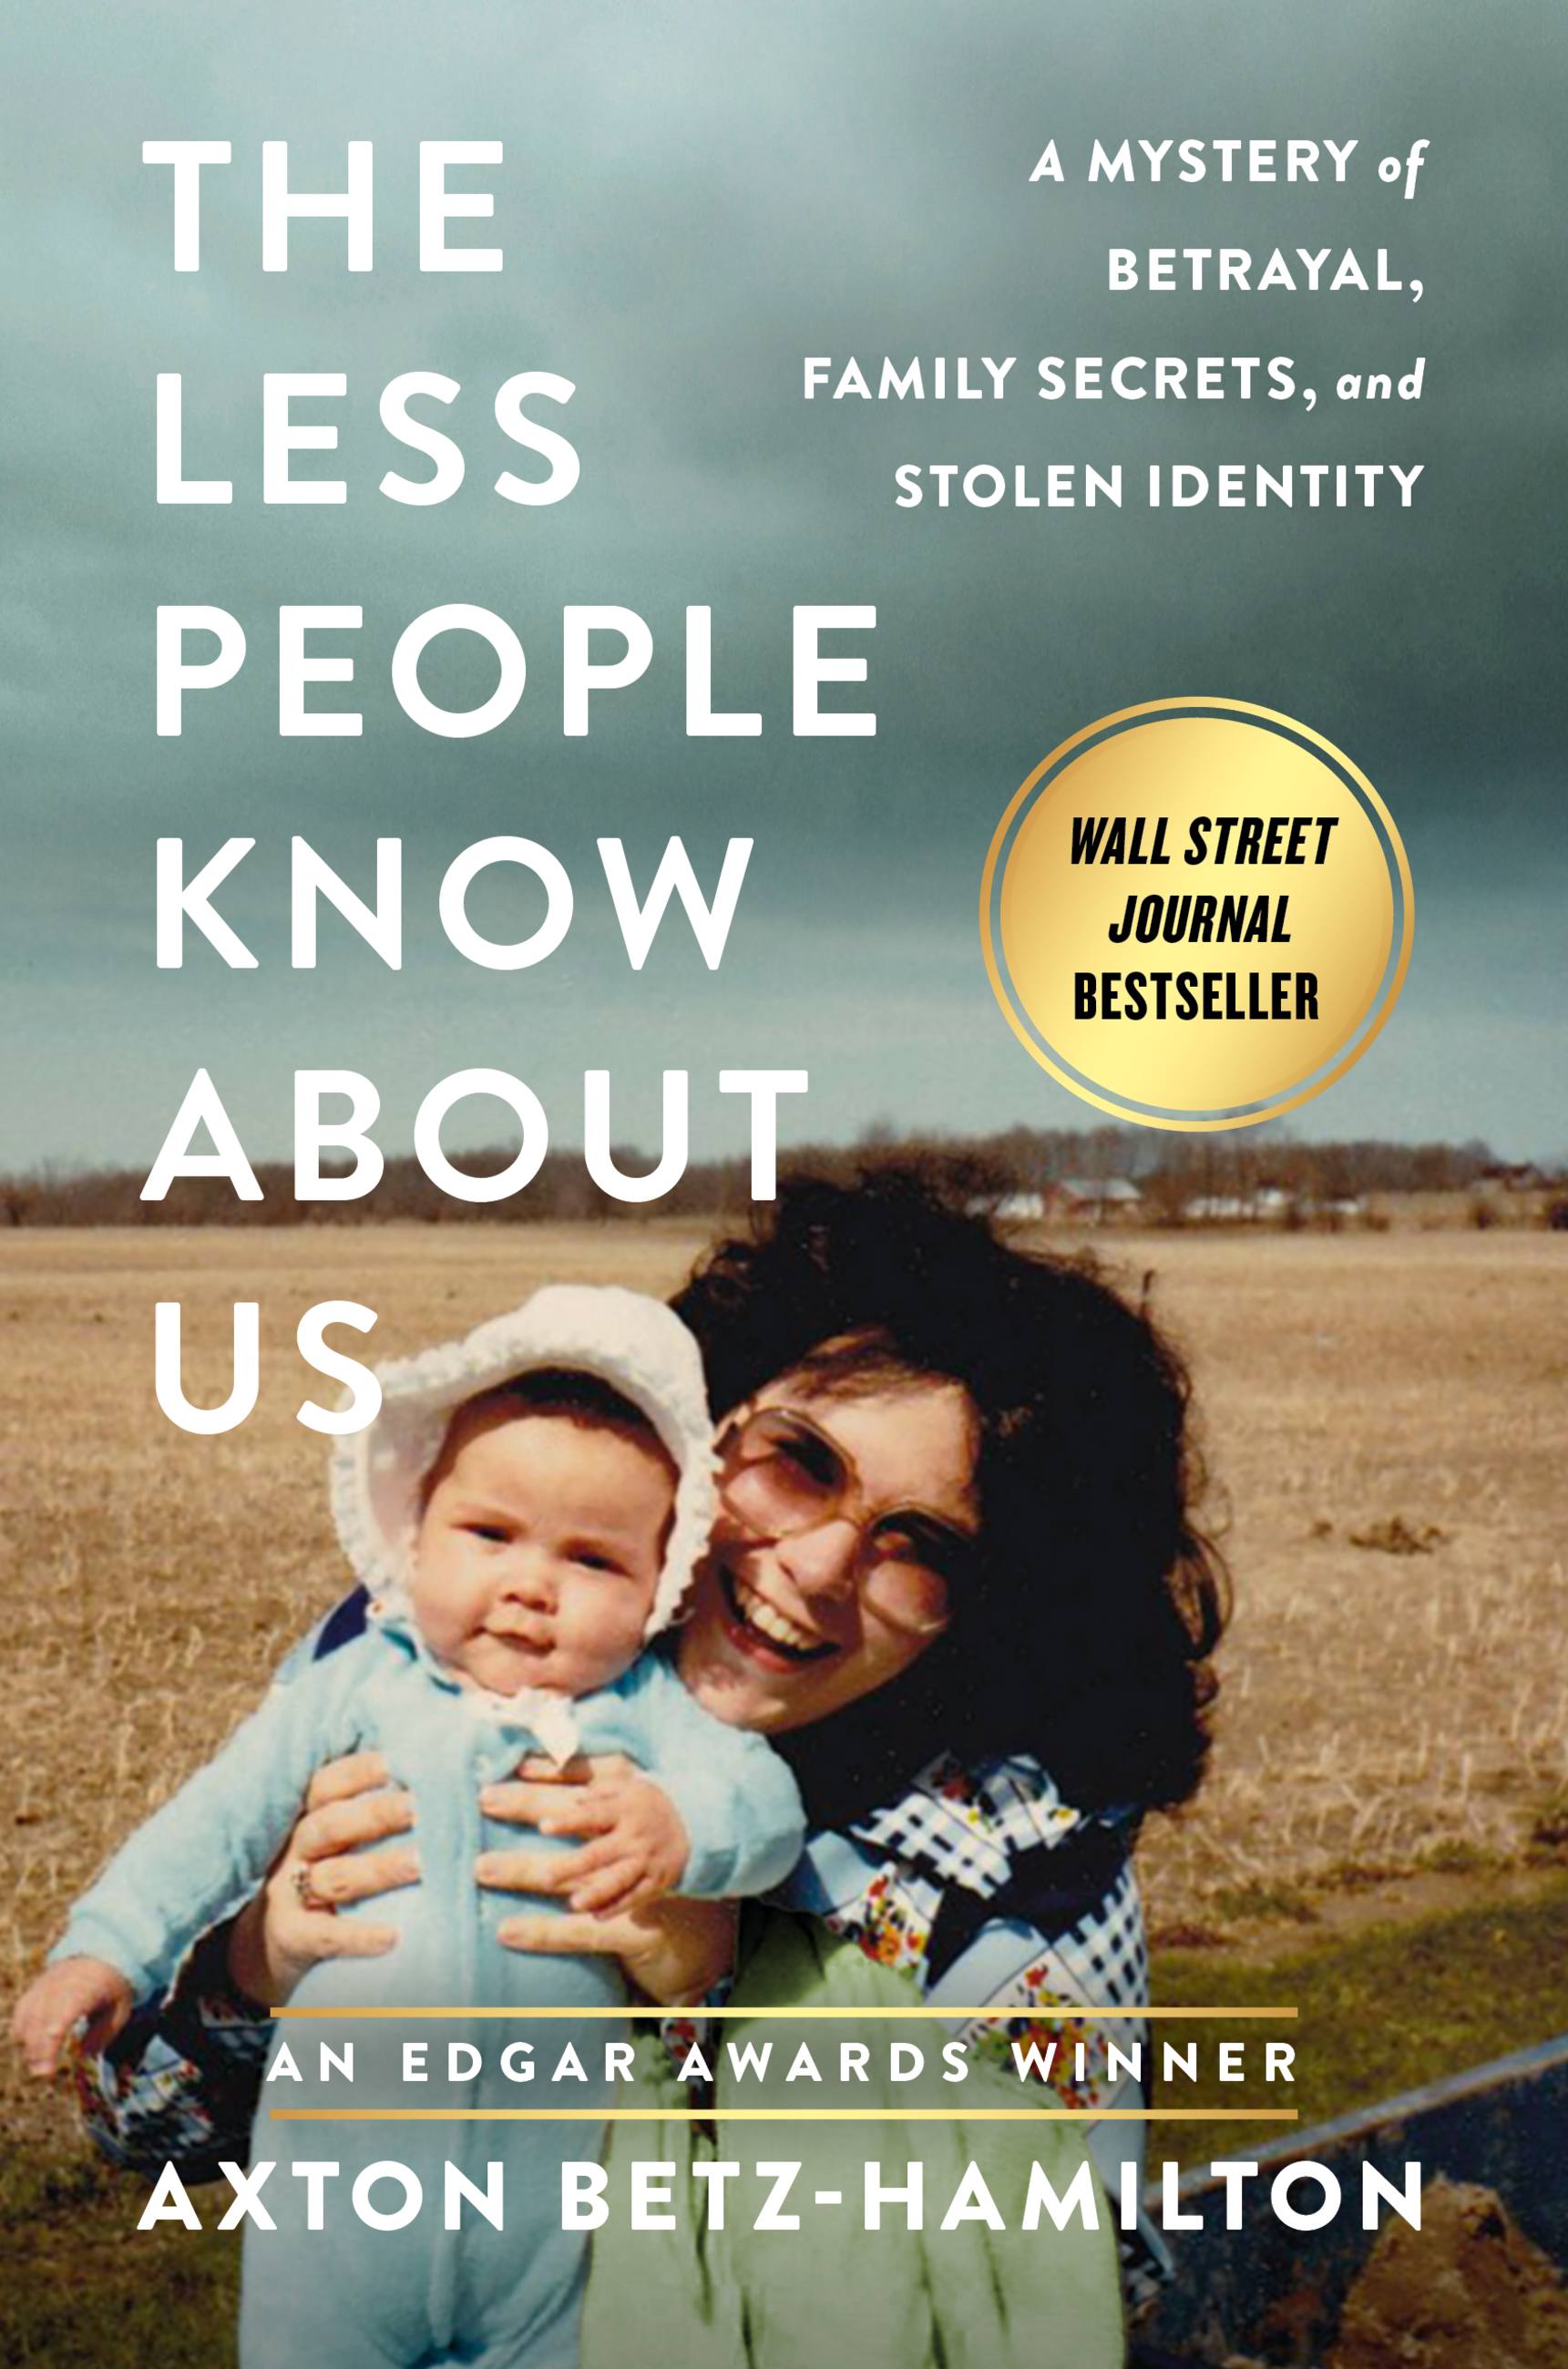 The Less People Know About Us by Axton Betz-Hamilton